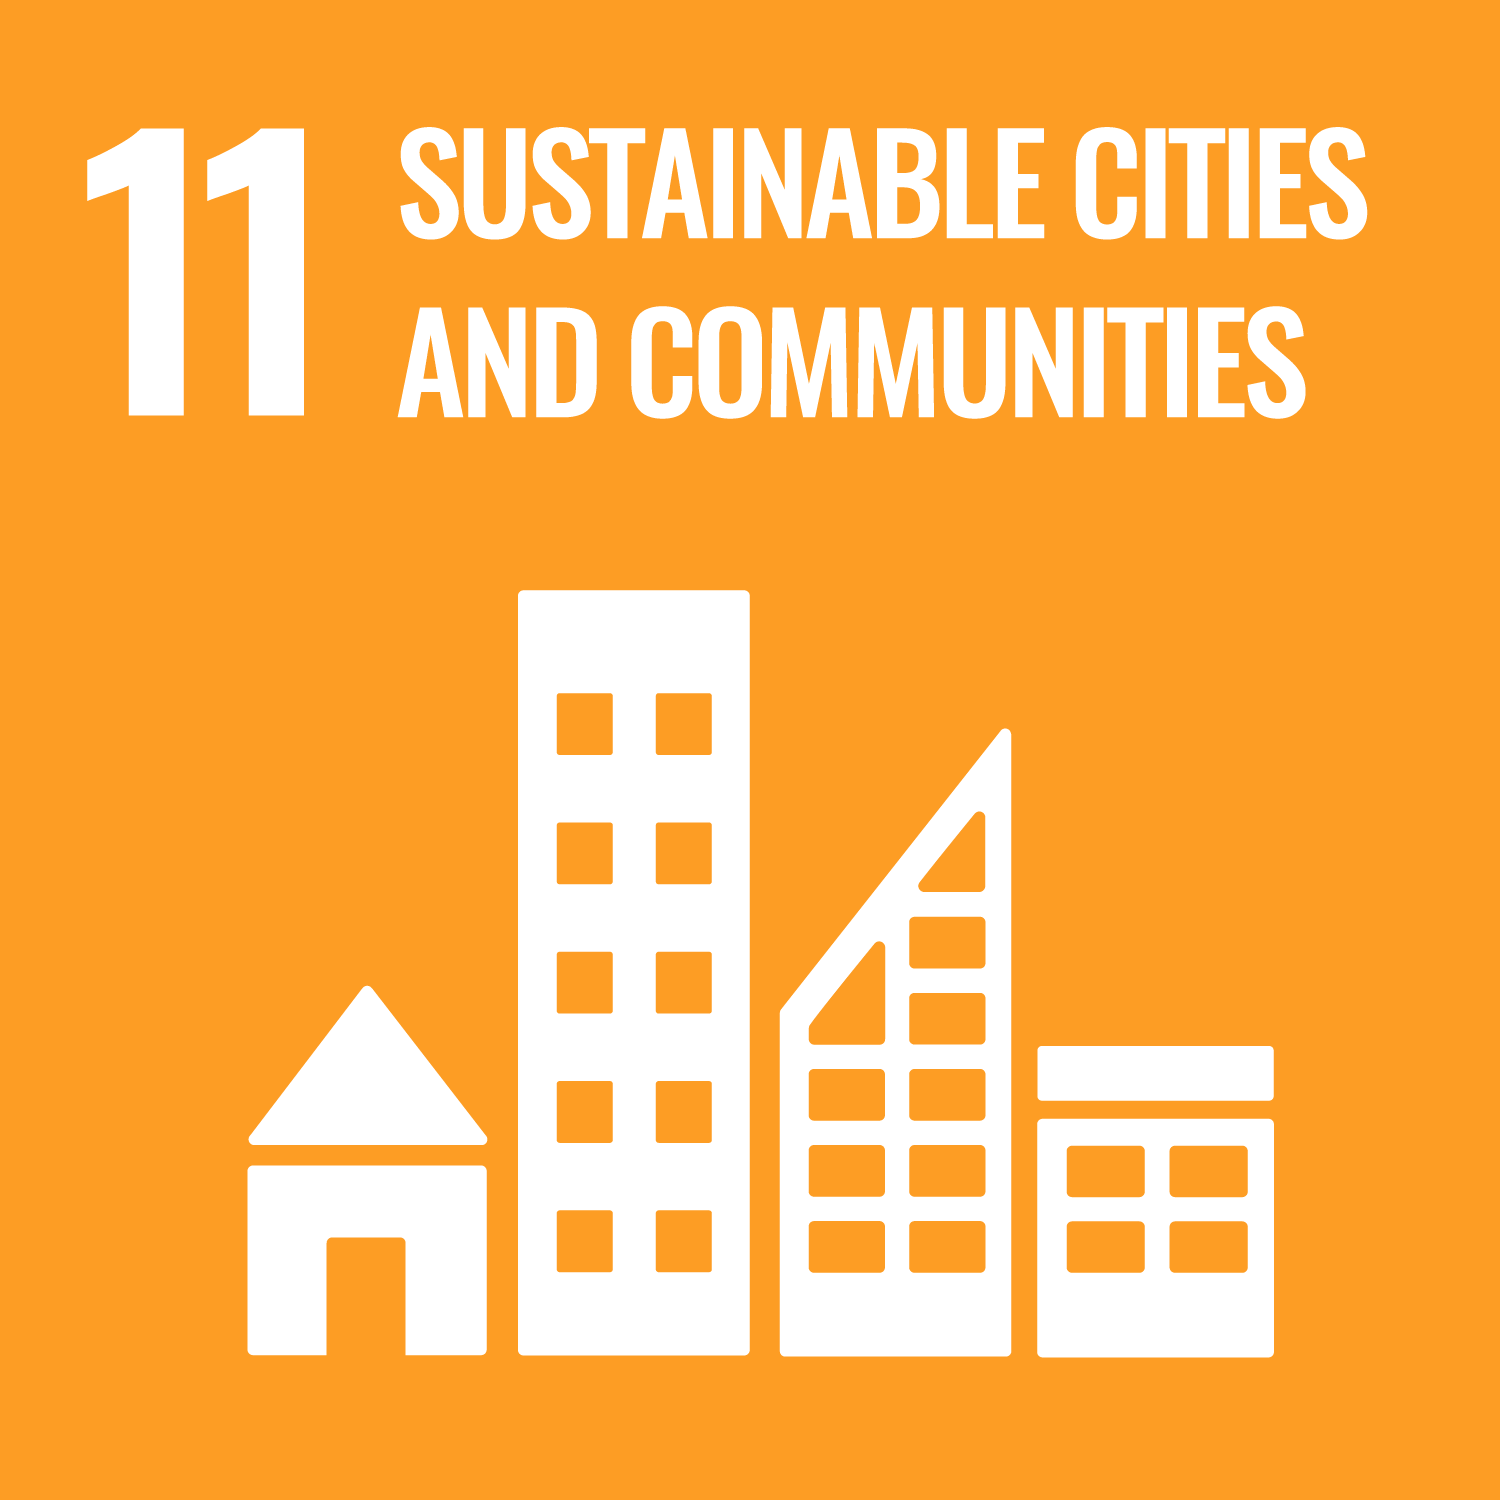 Sustainable cities and economies